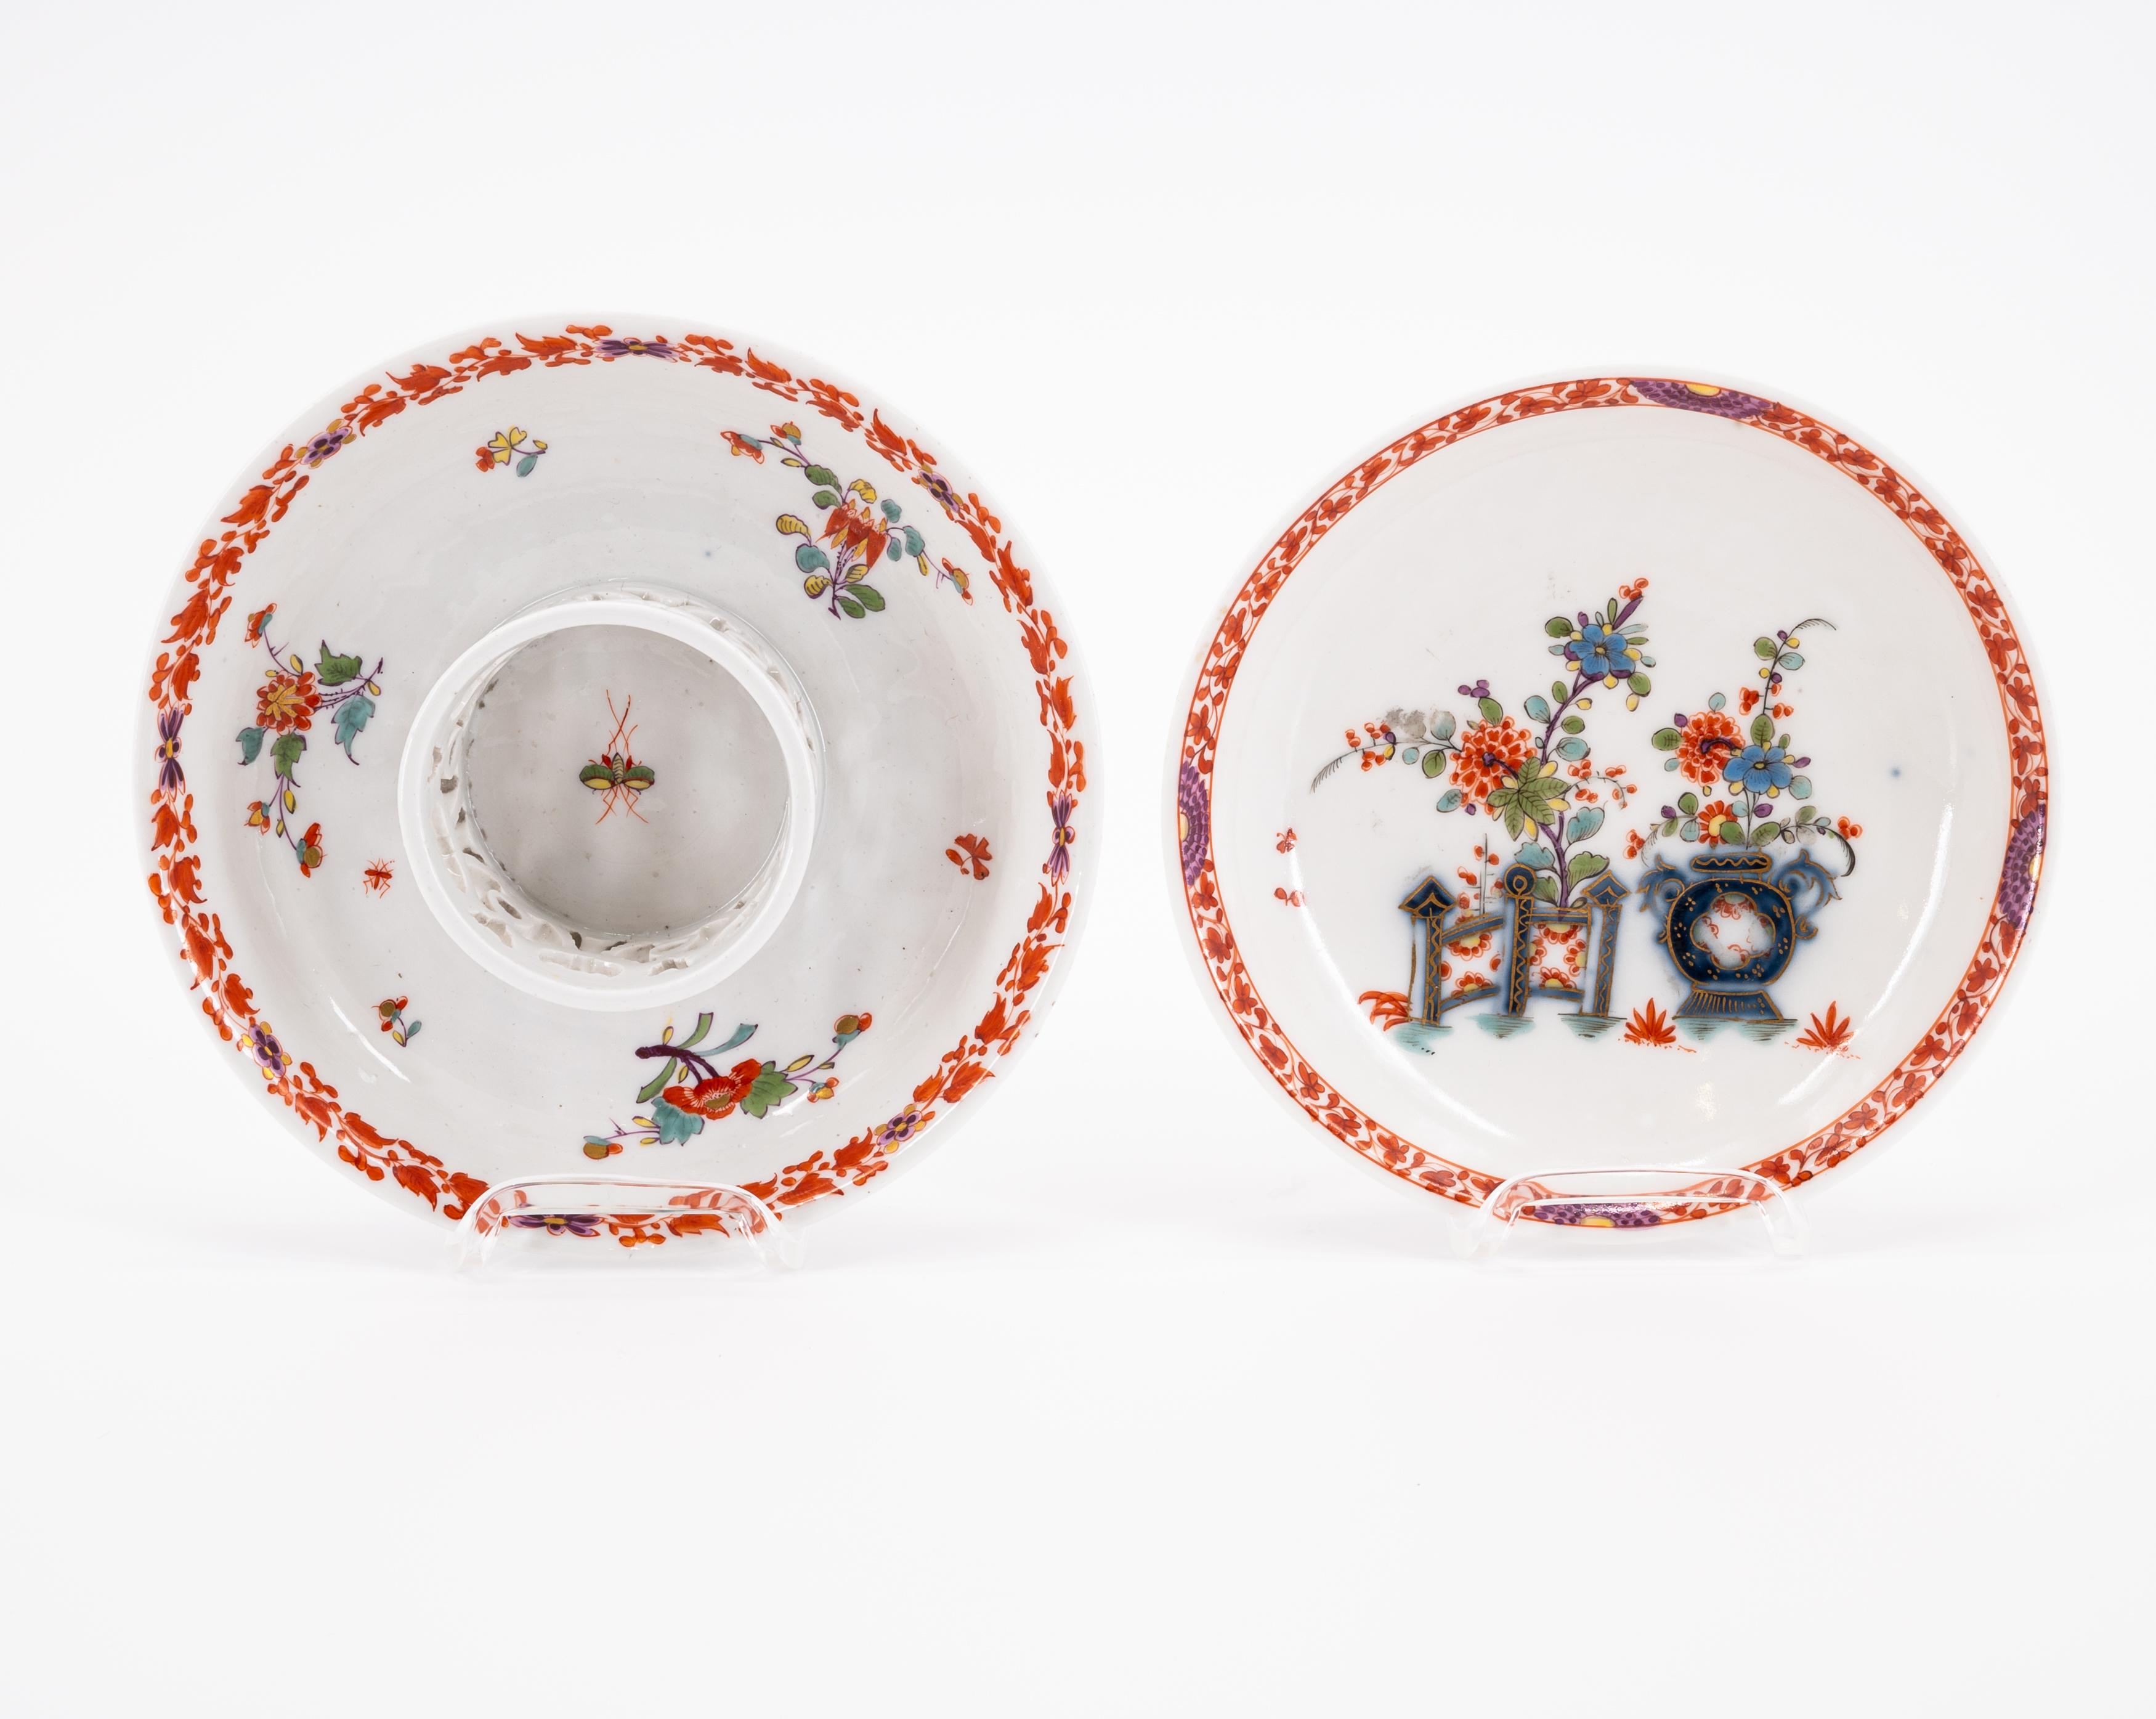 PORCELAIN TREMBLEUSE, TEA BOWL AND SAUCER WITH TABLE PATTERN AND KAKIEMON DECOR - Image 7 of 8